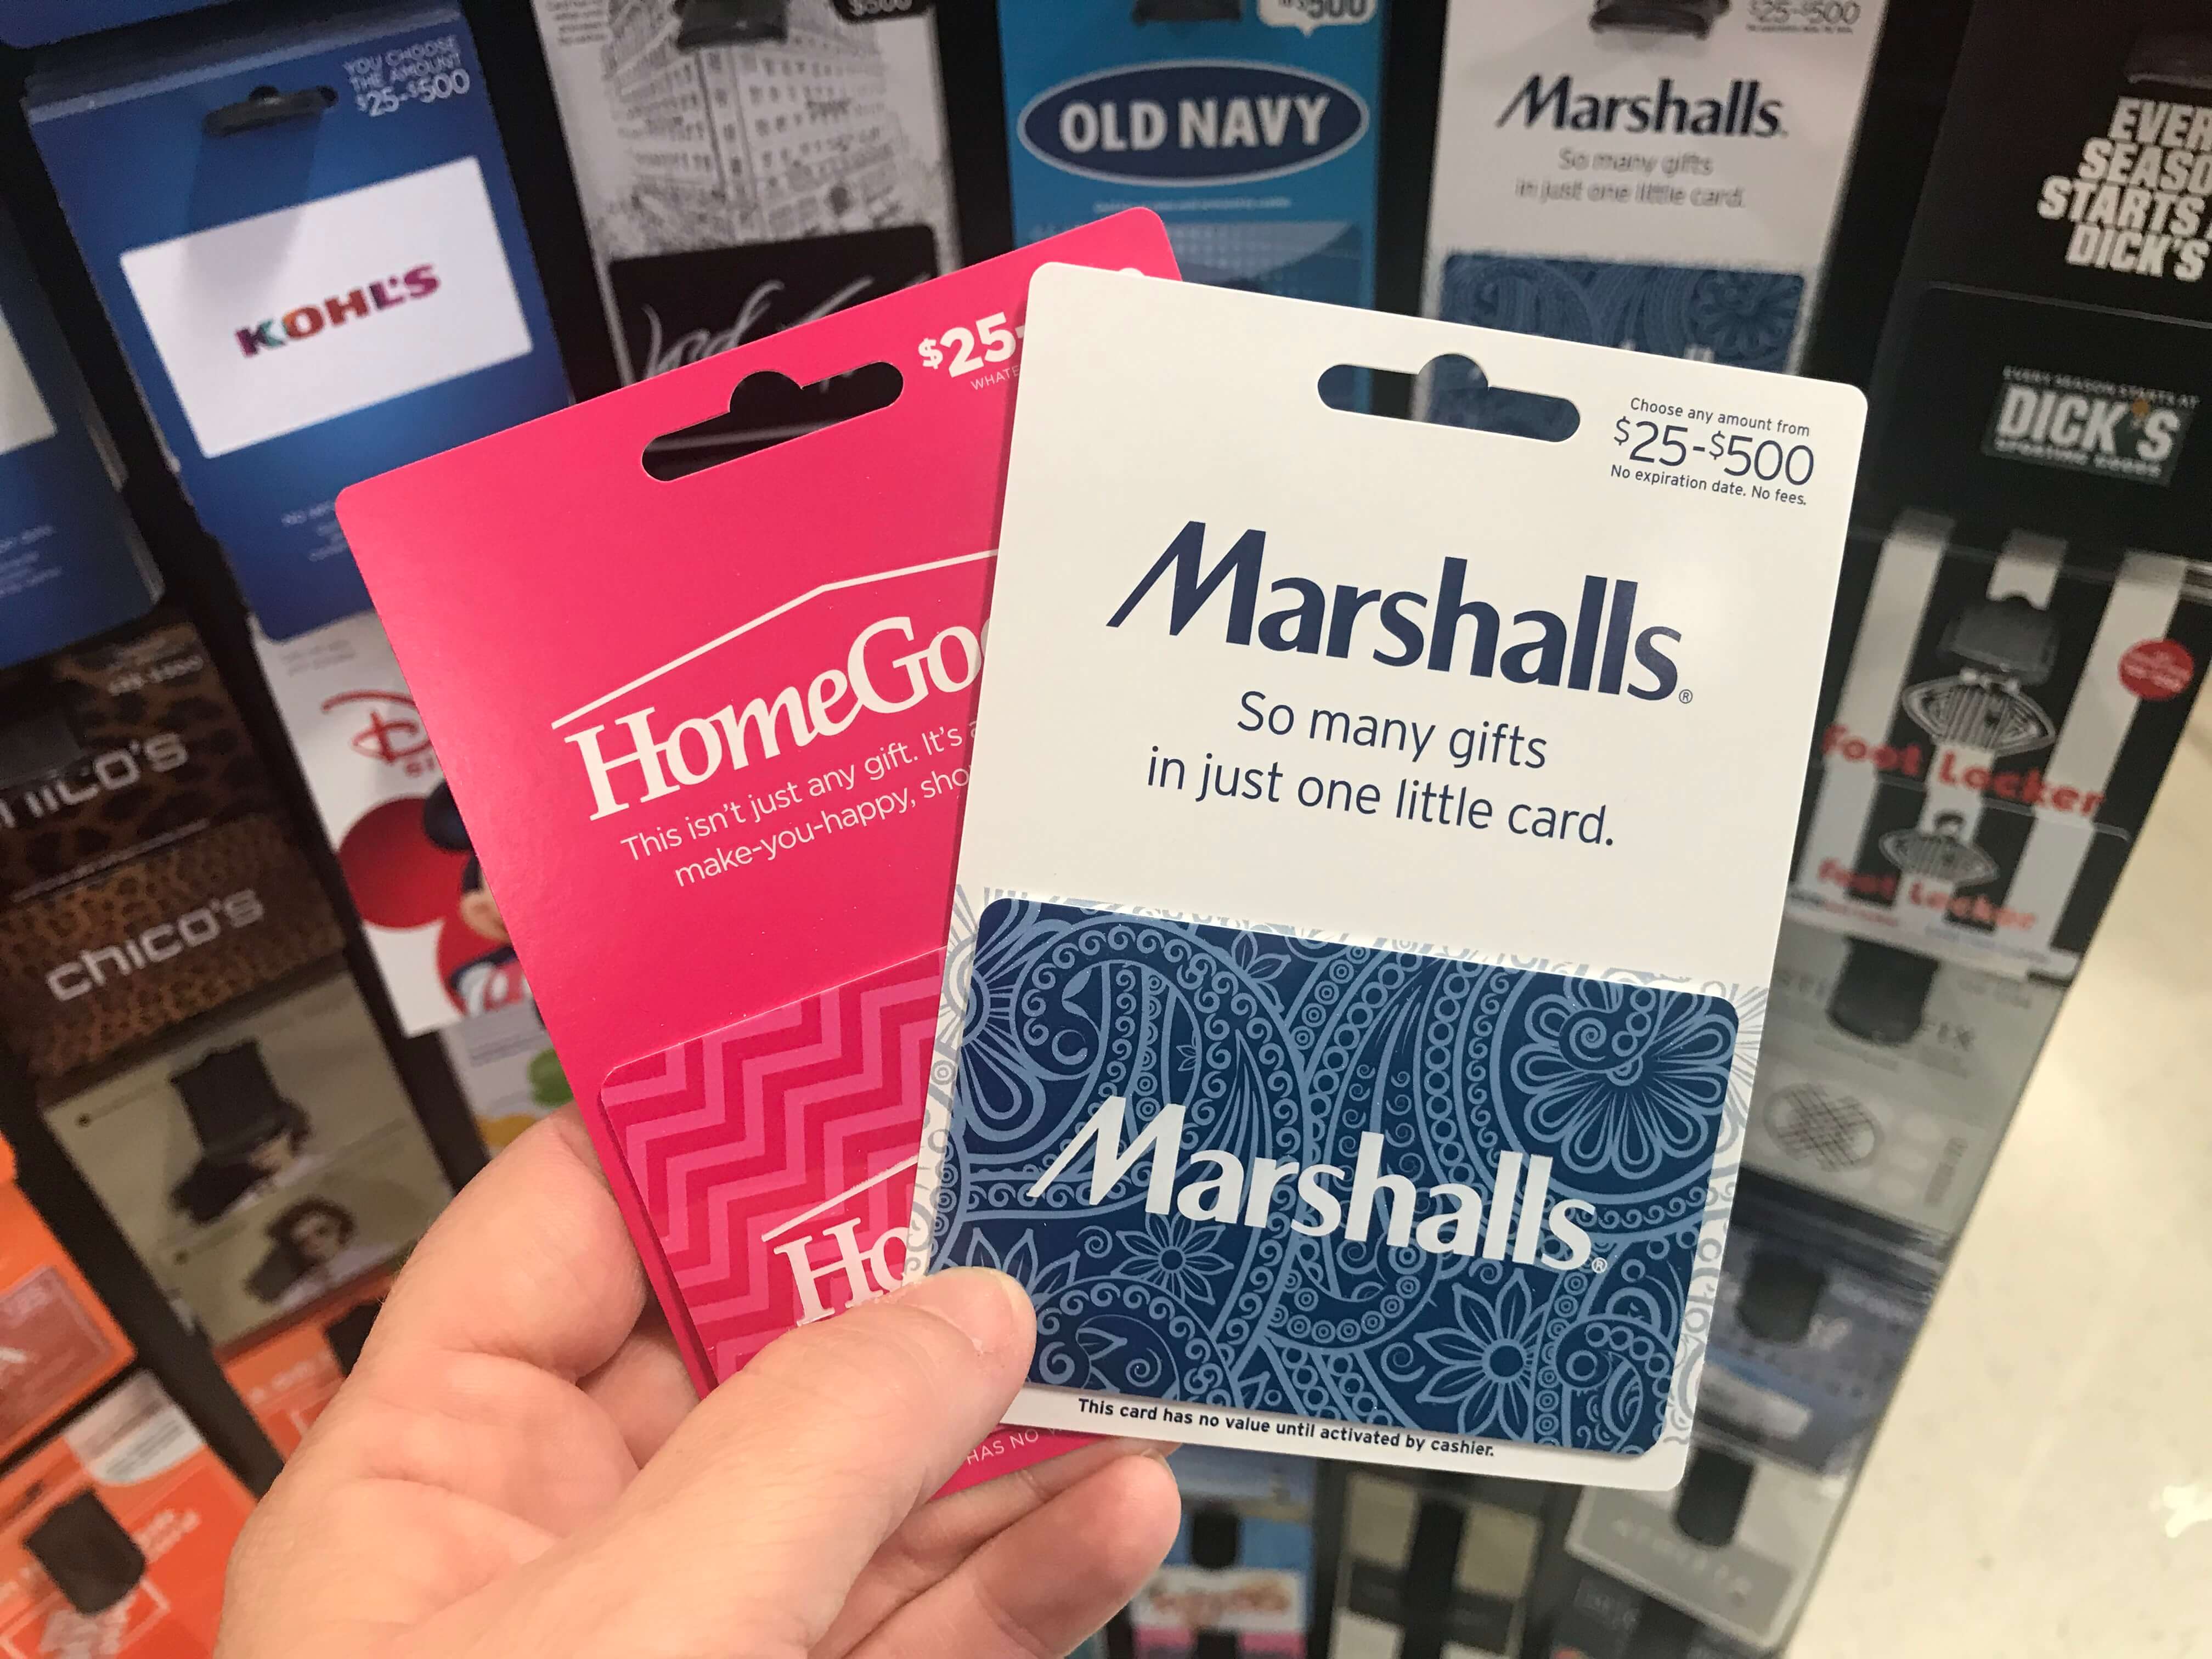 Rite Aid Pers Save Up To 16 On Marshalls Homegoods Gift Cards